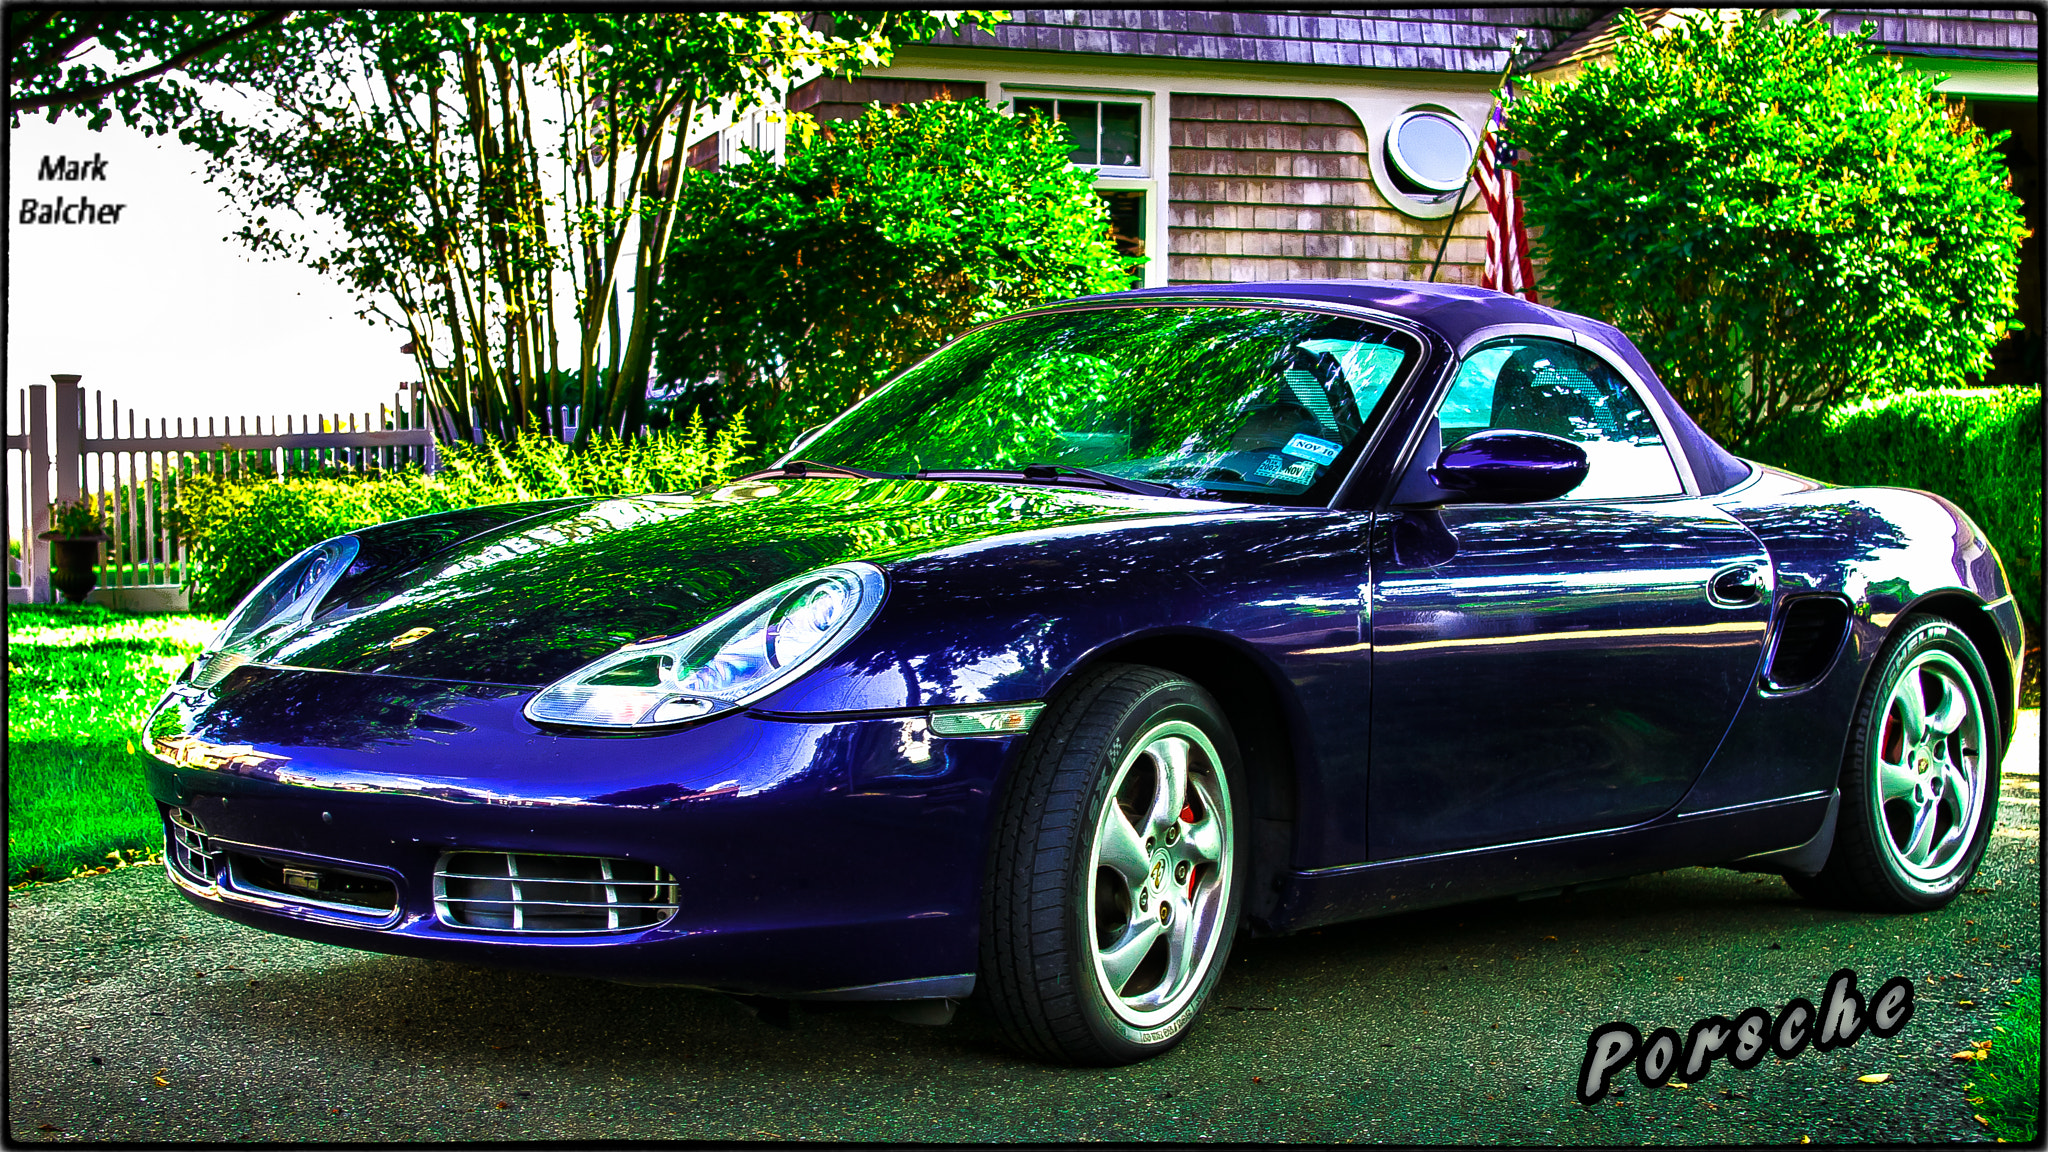 Pentax K-x sample photo. Nice porsche parked at summer beach house in madison, ct. photography